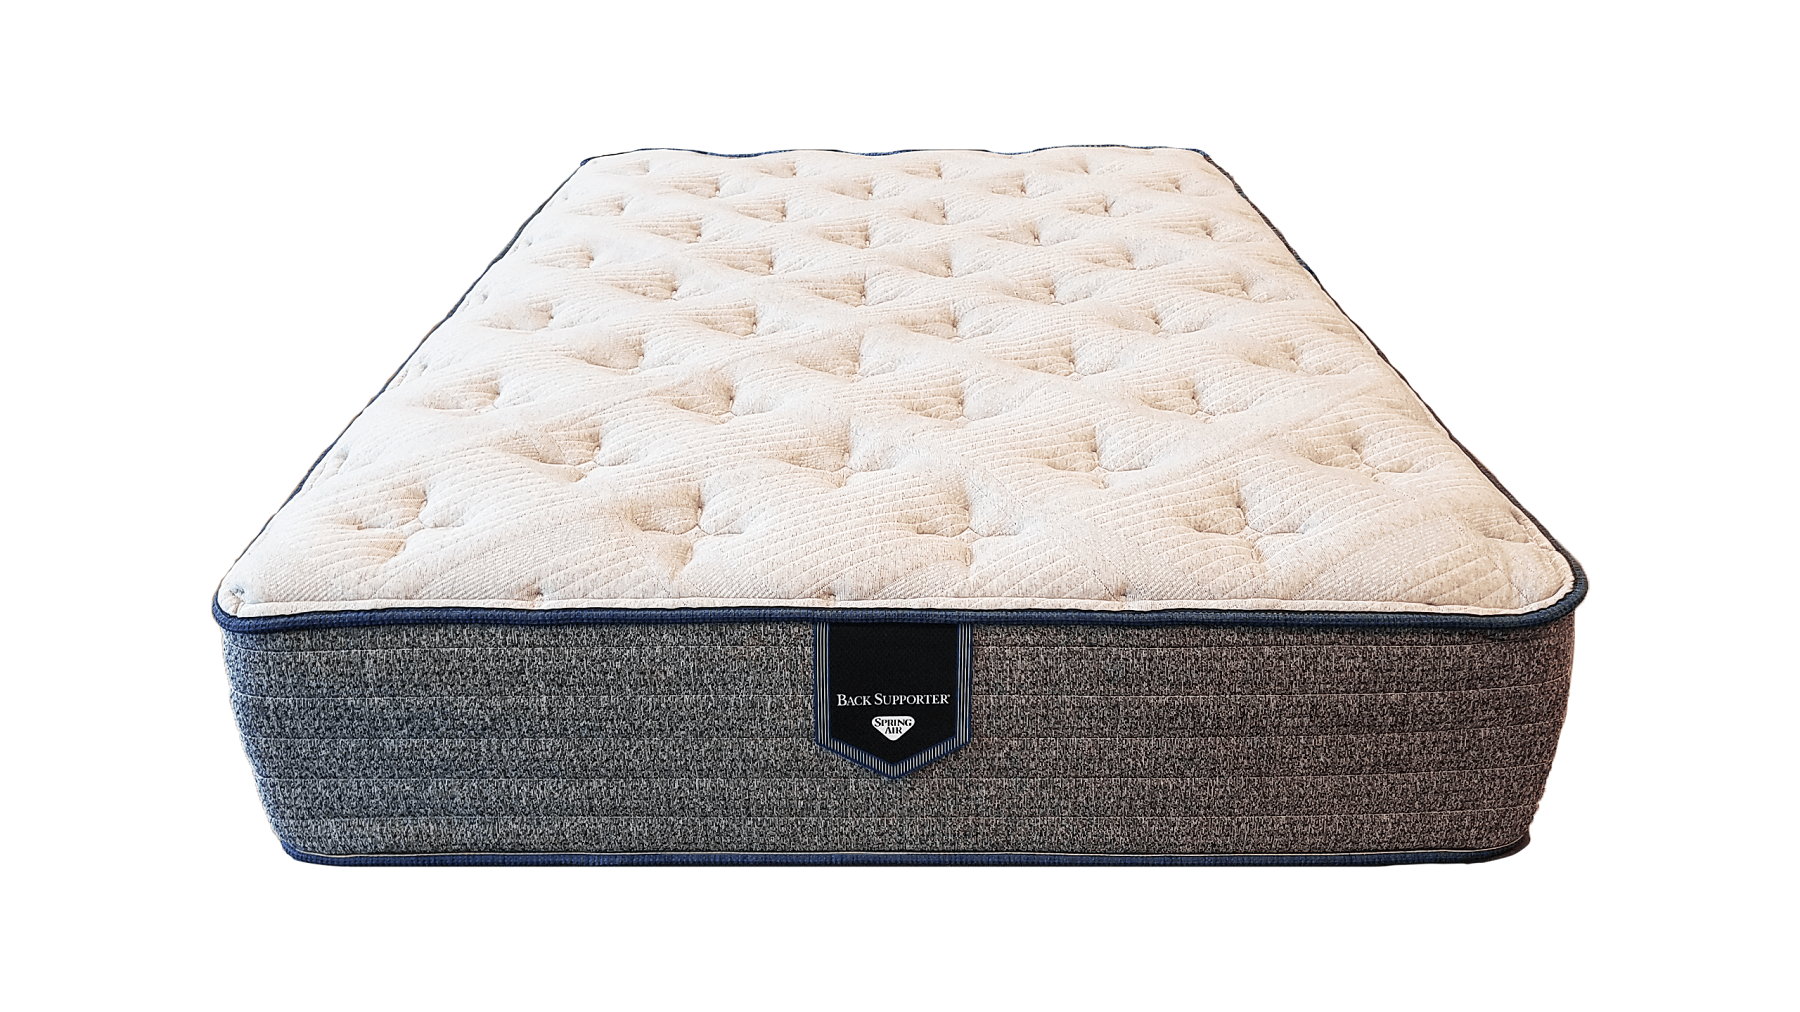 spring air imperial silk back supporter mattress